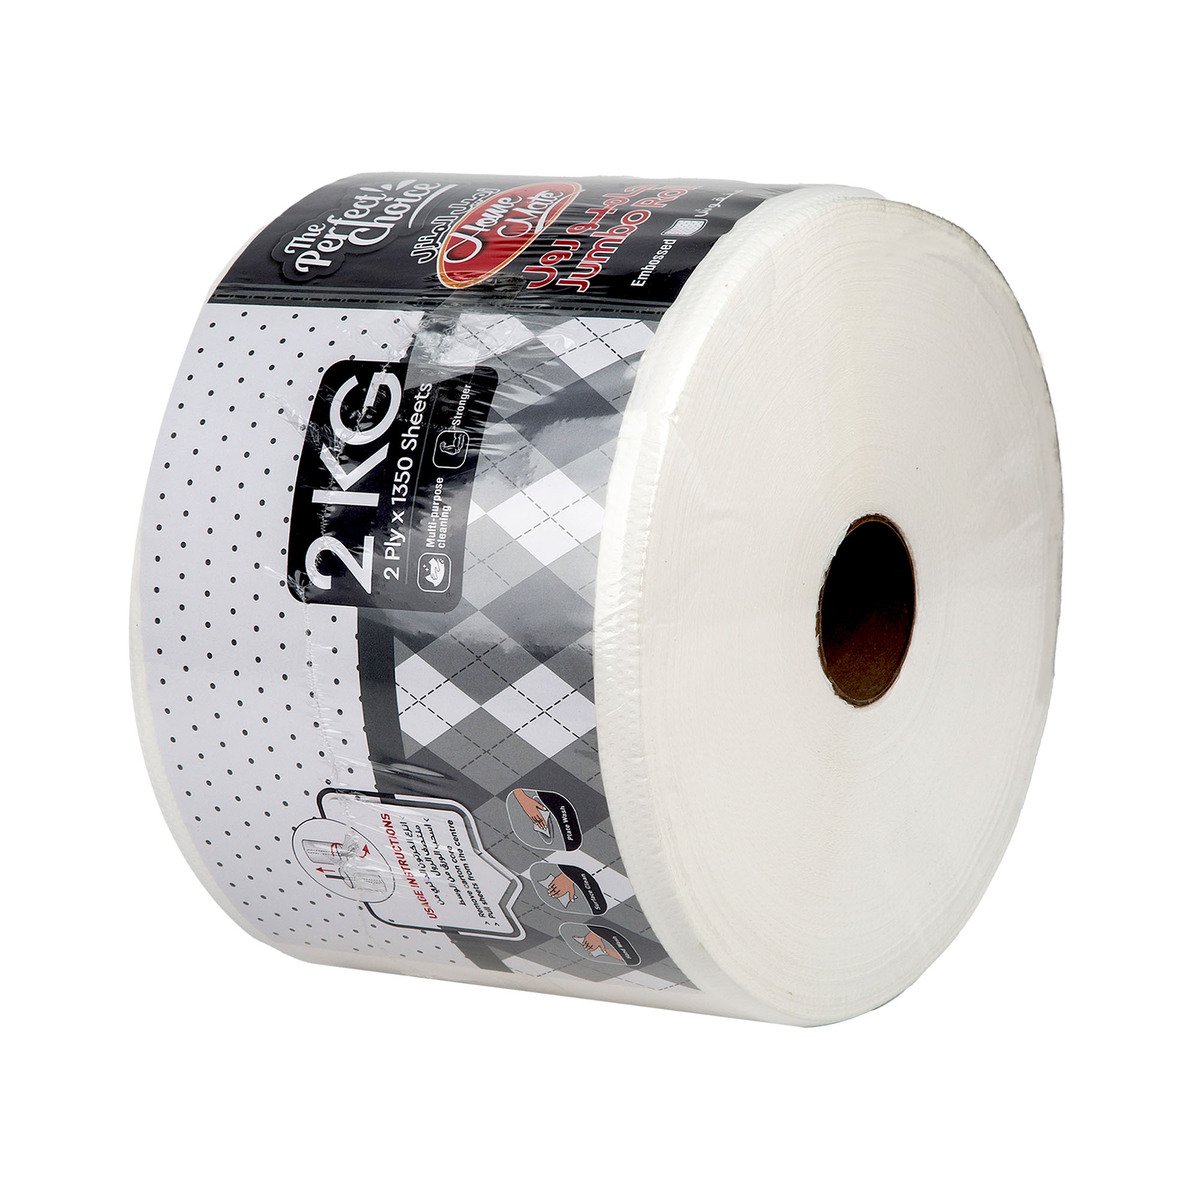 Home Mate Embossed Jumbo Roll 2ply 1350 Sheets 2 kg